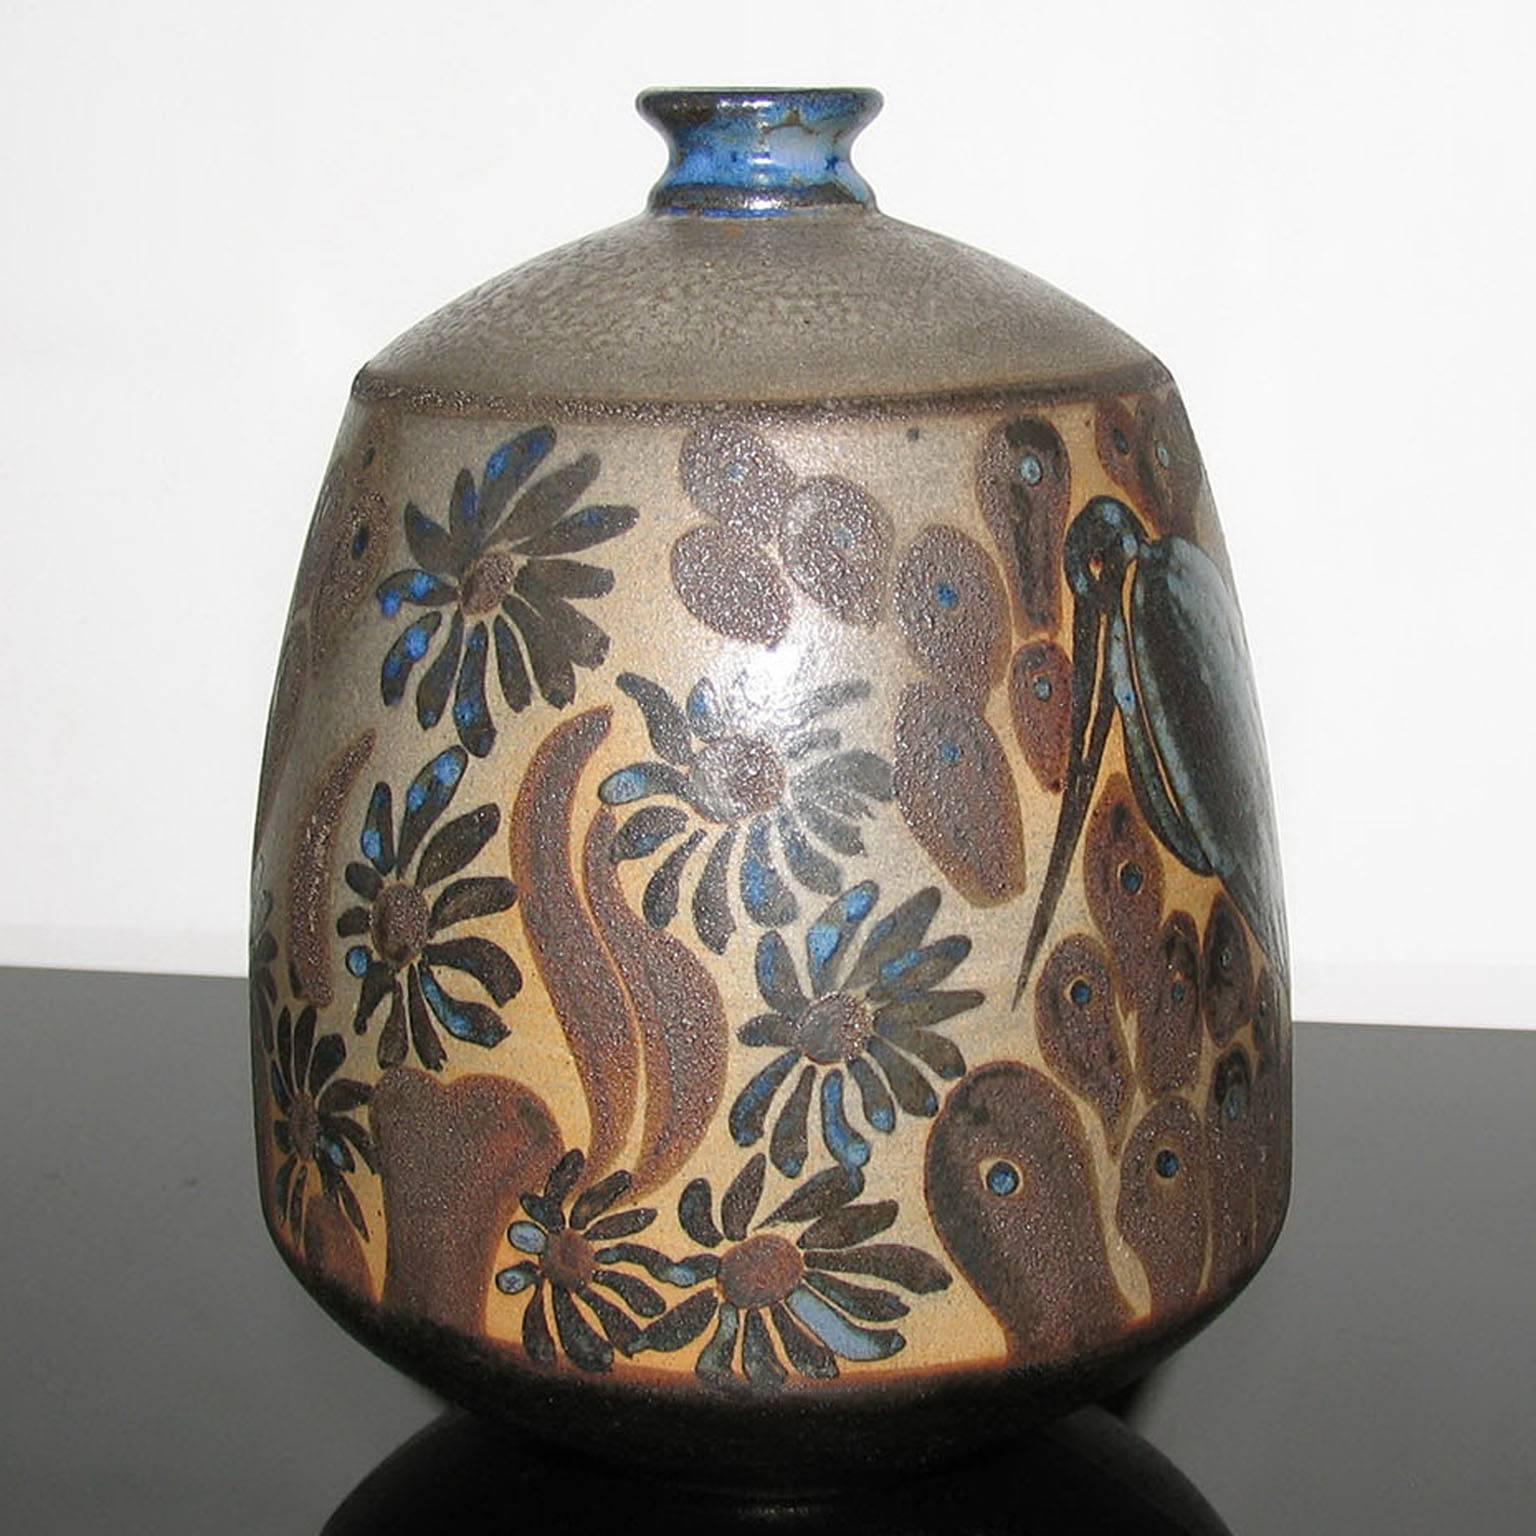 A superb example of Art Deco craftsmanship in France, produced by one of the world's finest workshops Primavera (Ateliers d'Art des magasins du Printemps), simila model exhibited at Autumn Salon in Paris, 1921. Poly-chrome enameled stoneware vase